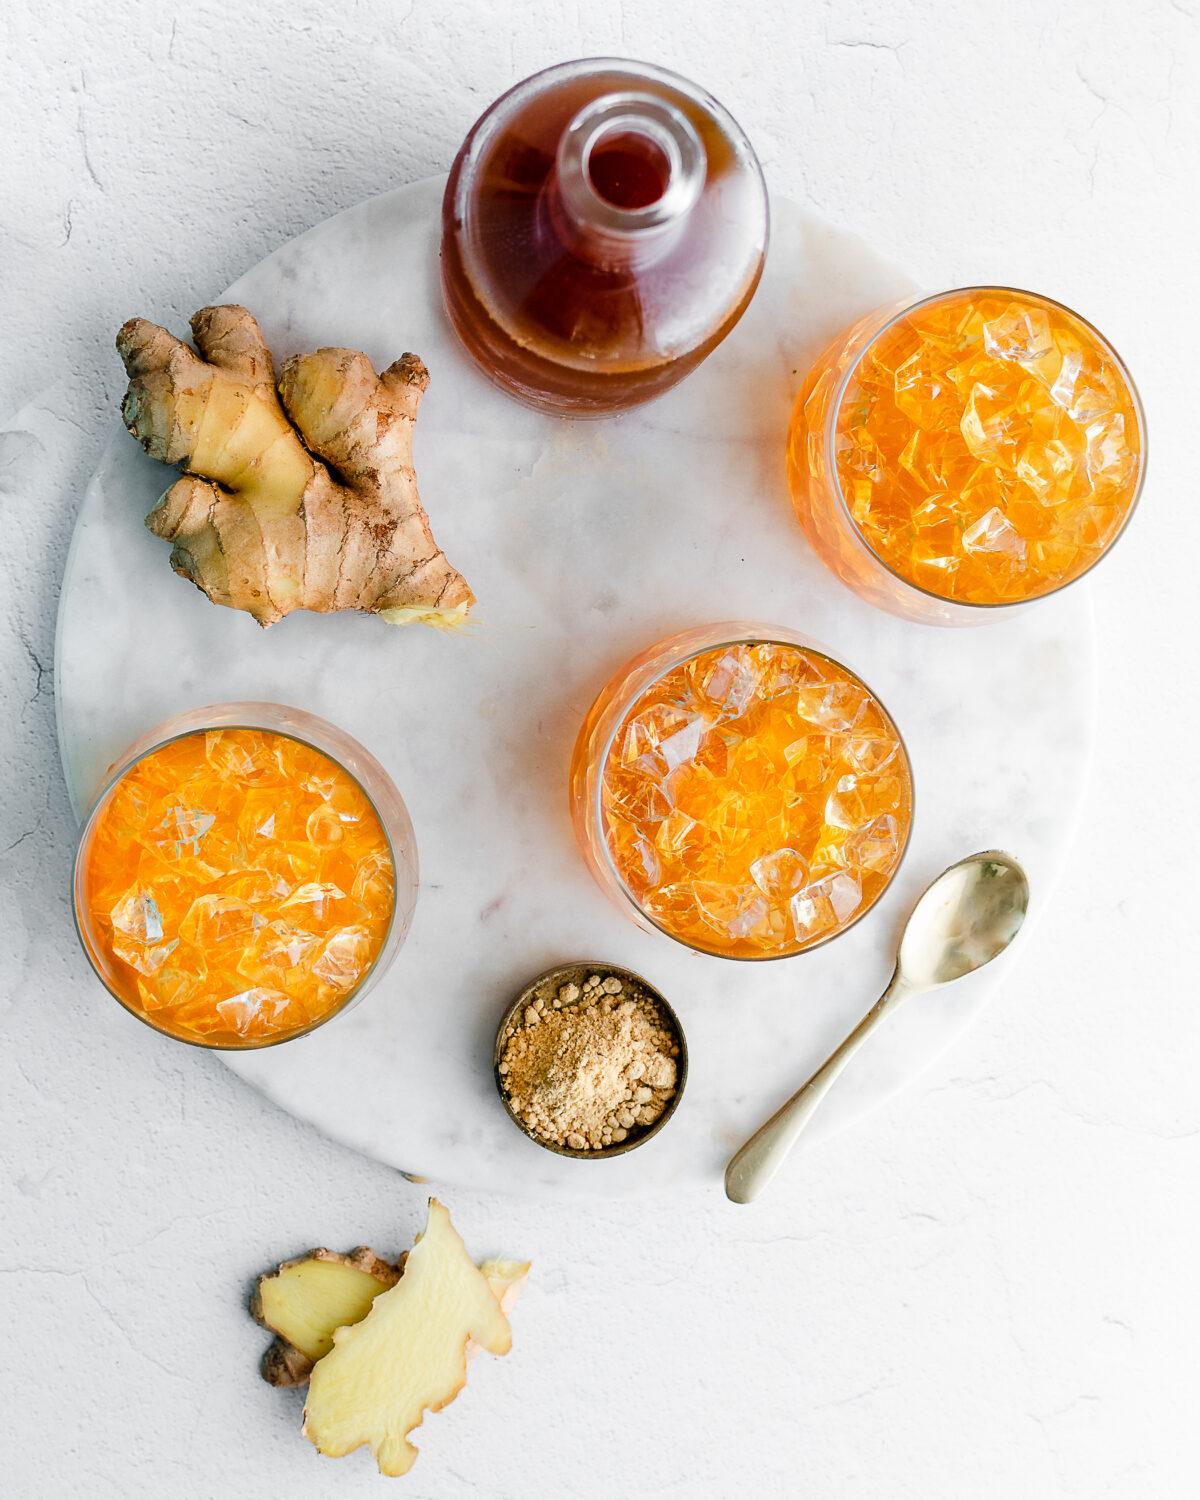 Old-fashioned ginger switchel, with its bracing acidity and bittersweet molasses, is a refreshing and restorative summer drink. (Jennifer McGruther)